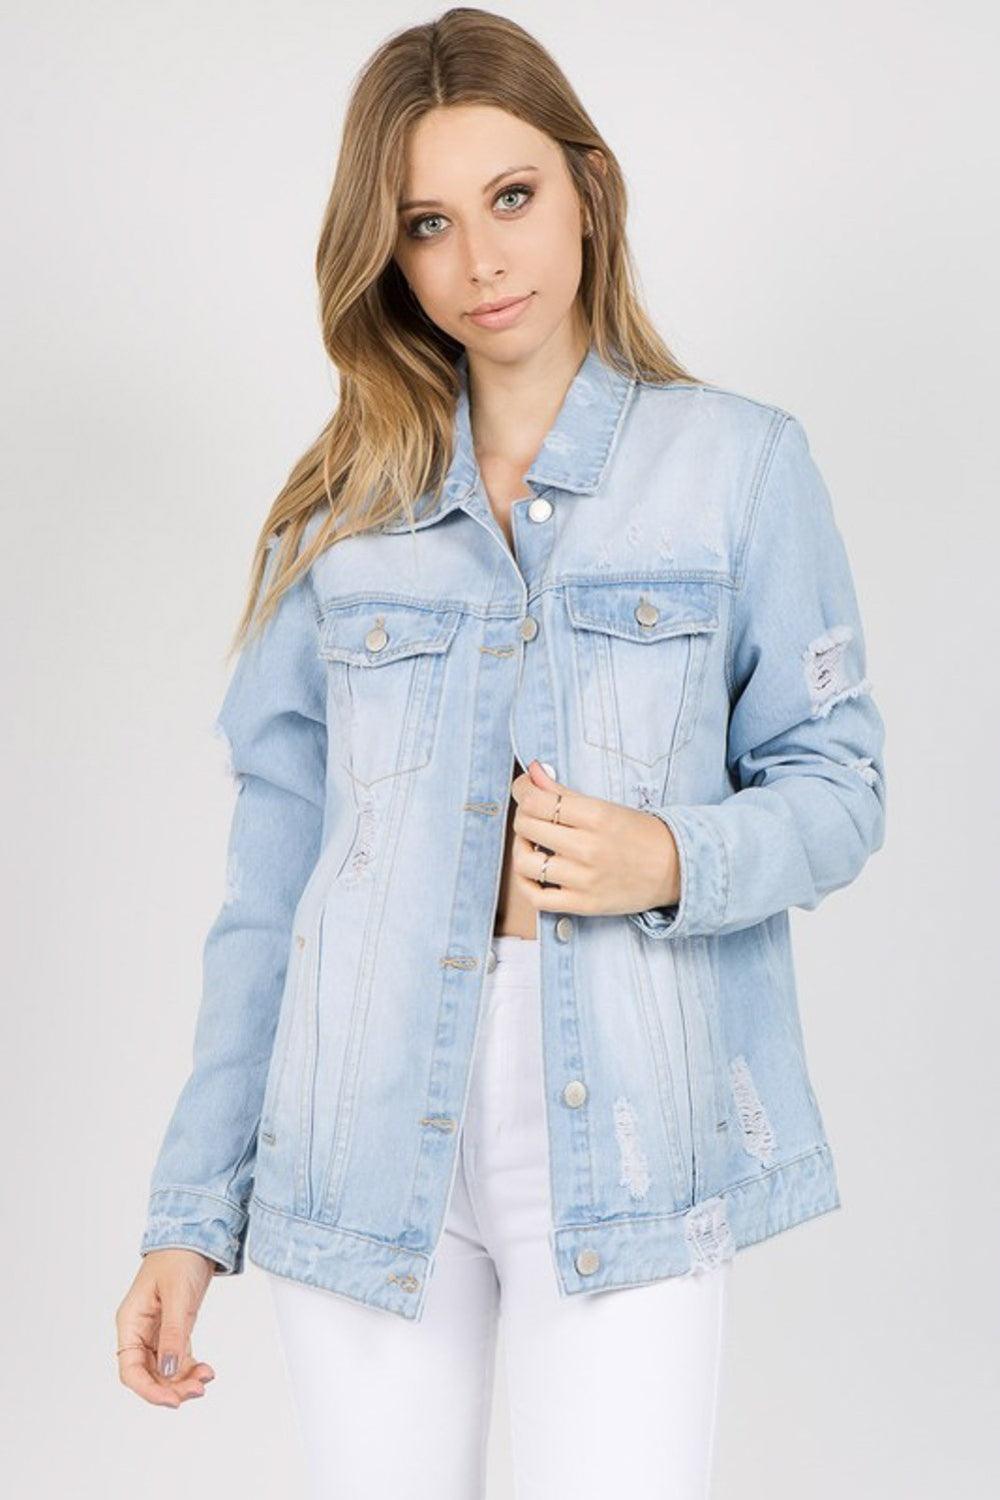 American Bazi Letter Patched Distressed Denim Jacket Jackets